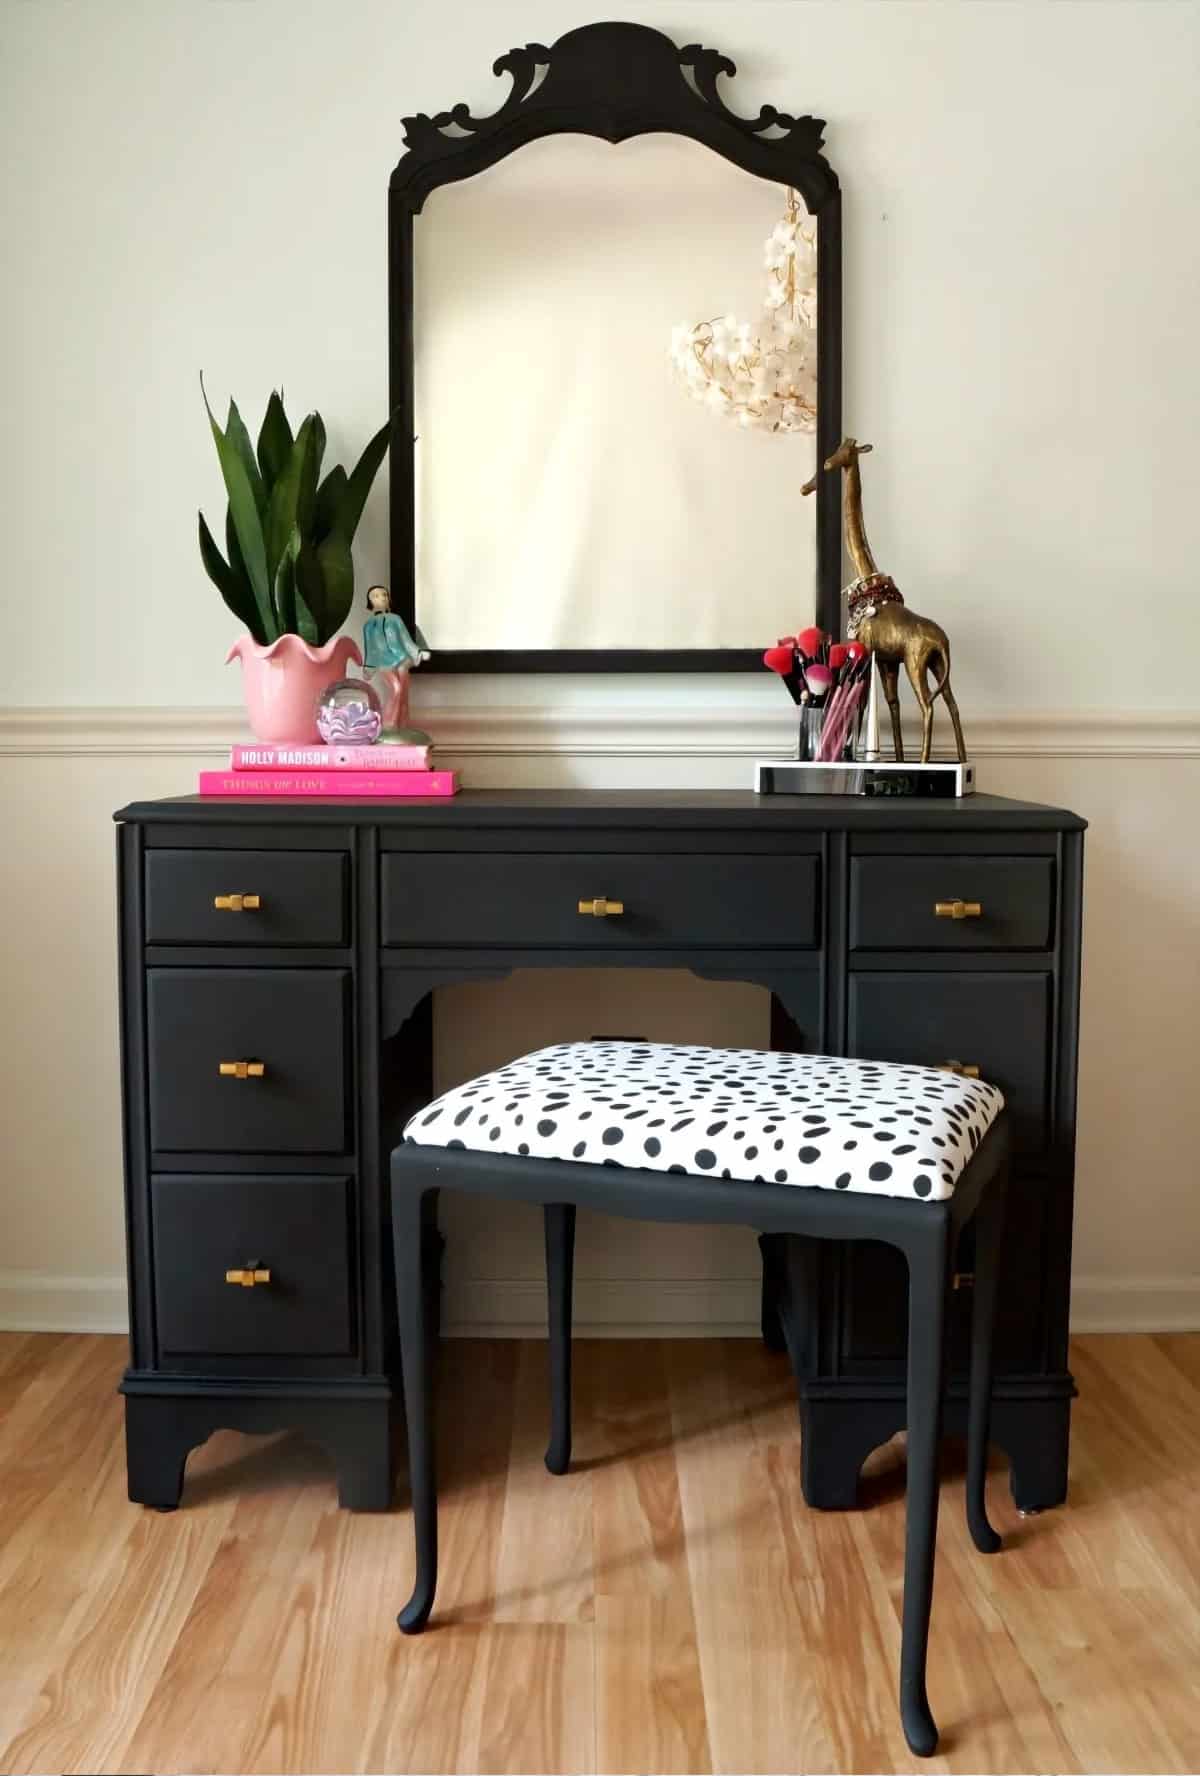 Black painted desk and animal print chair in front of a large black mirror.